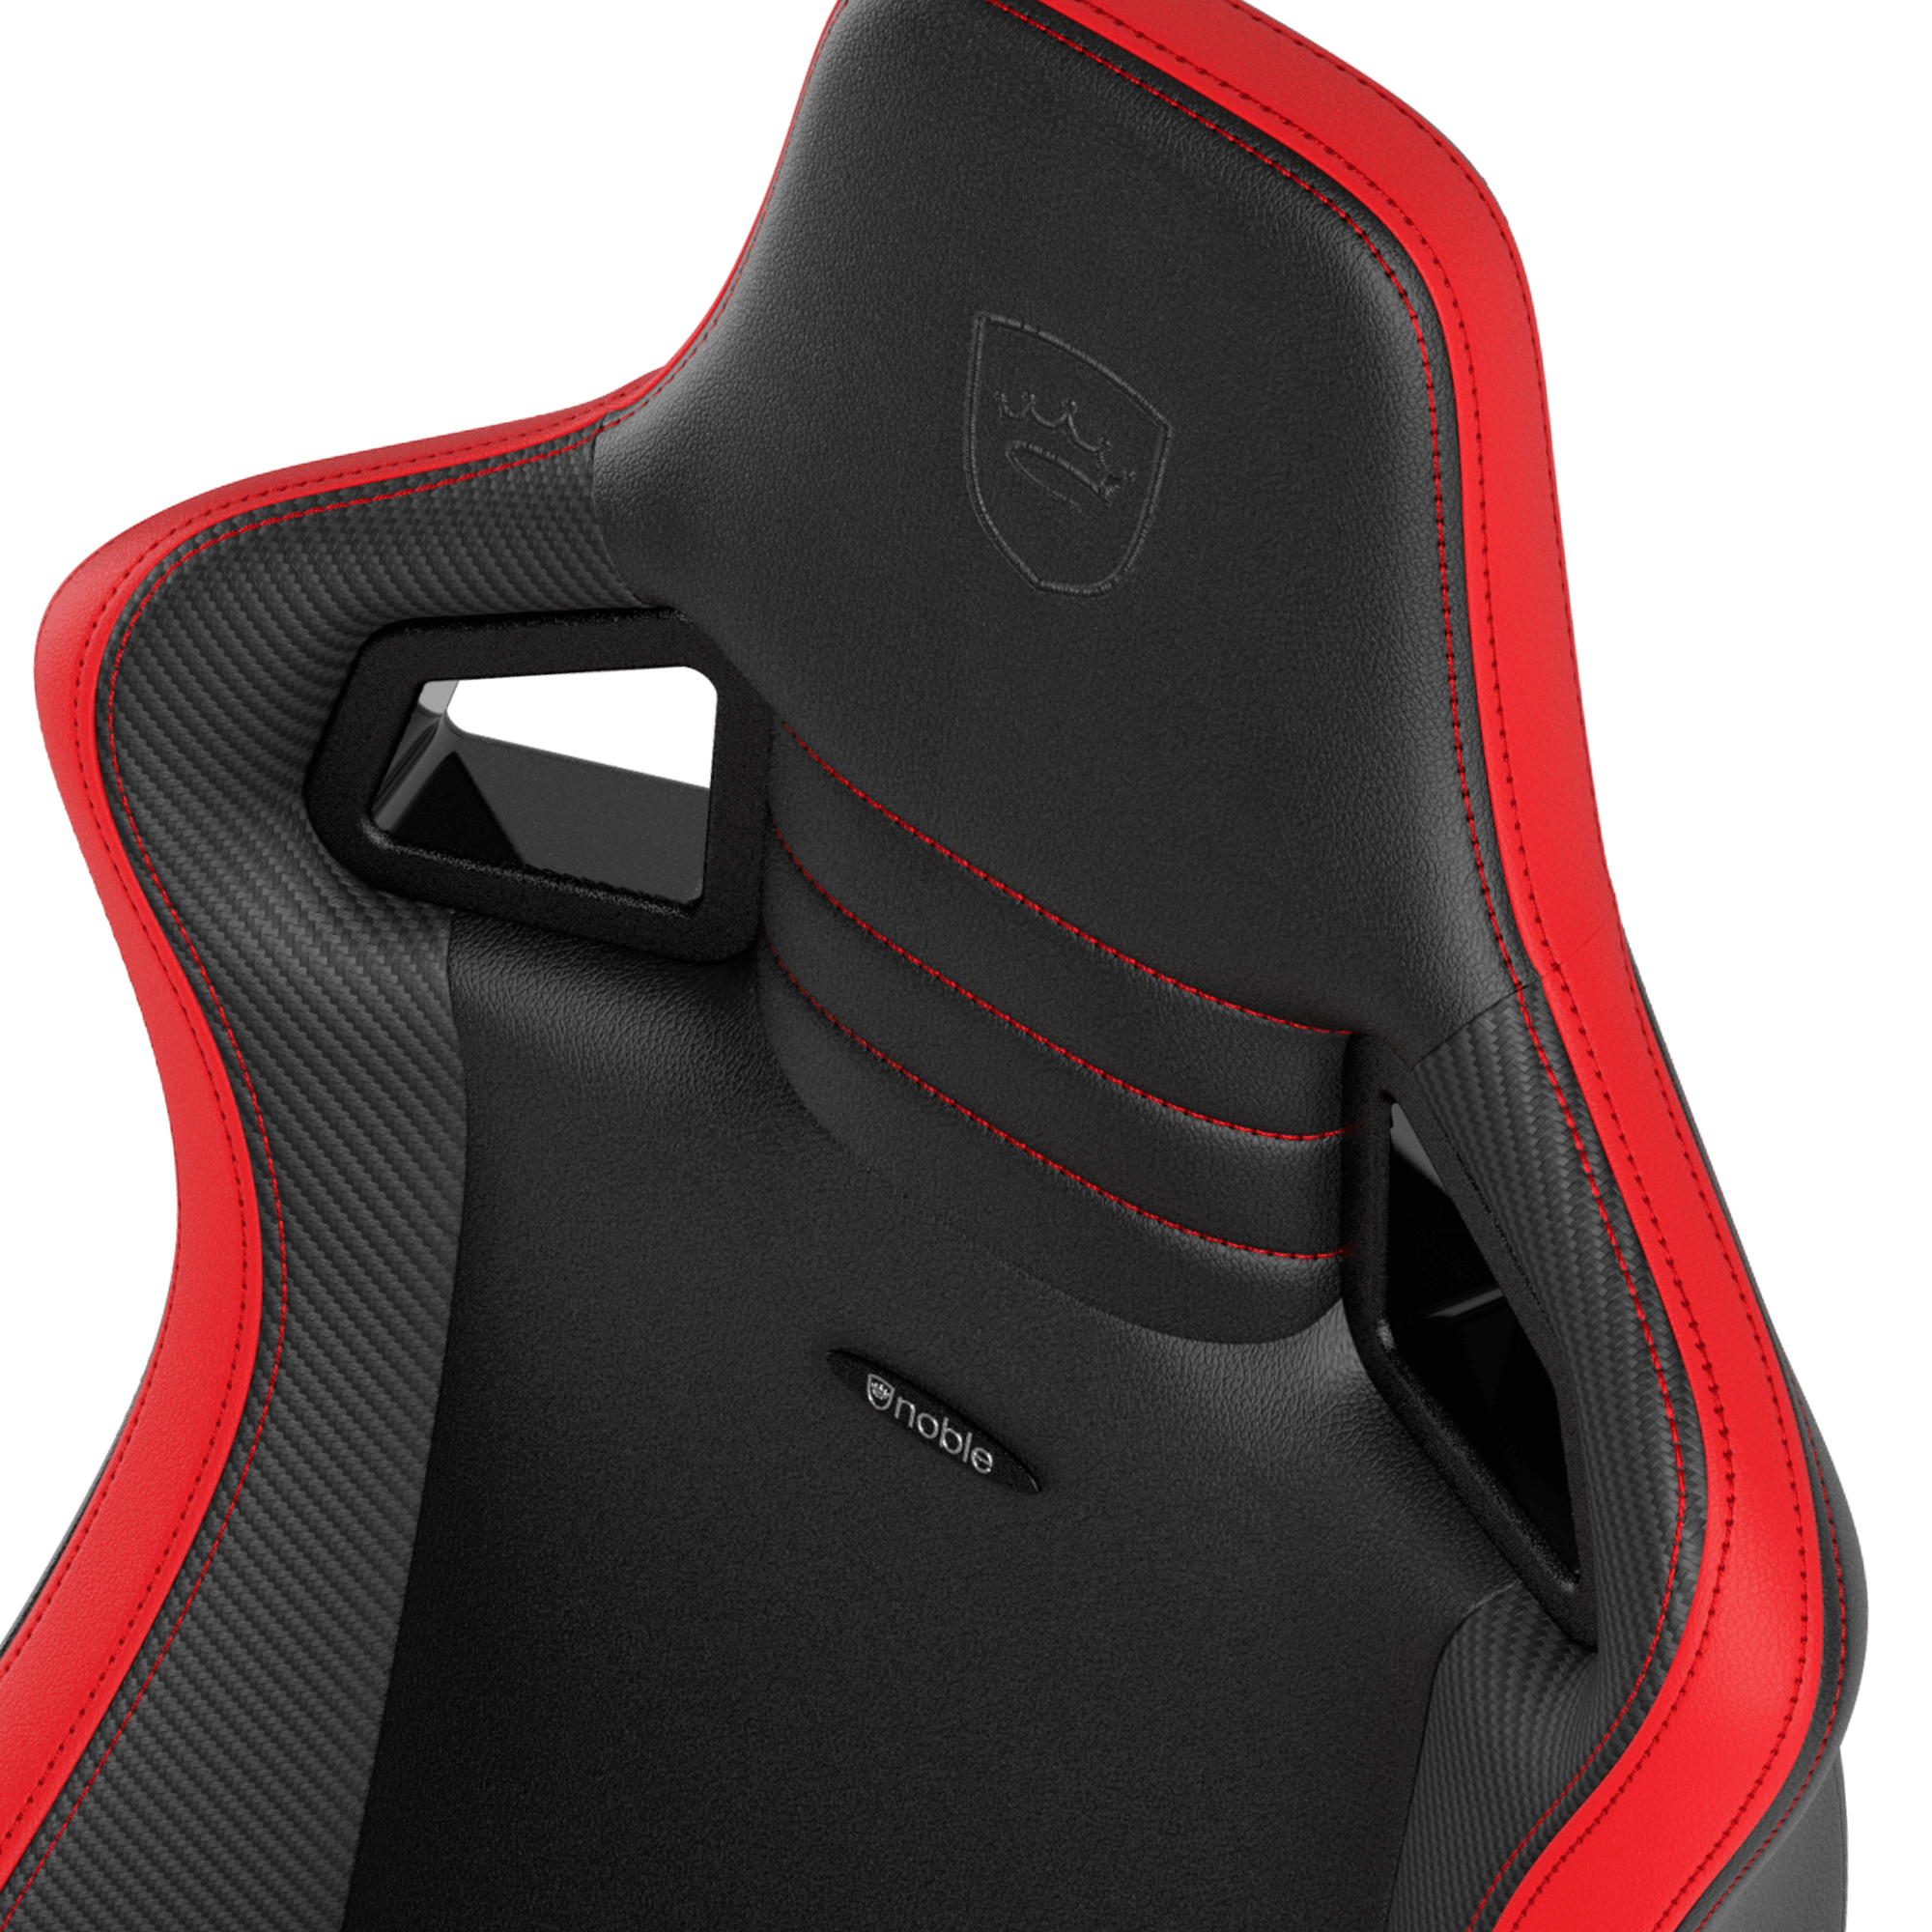 EPIC Compact Zwart/Carbon/Rood